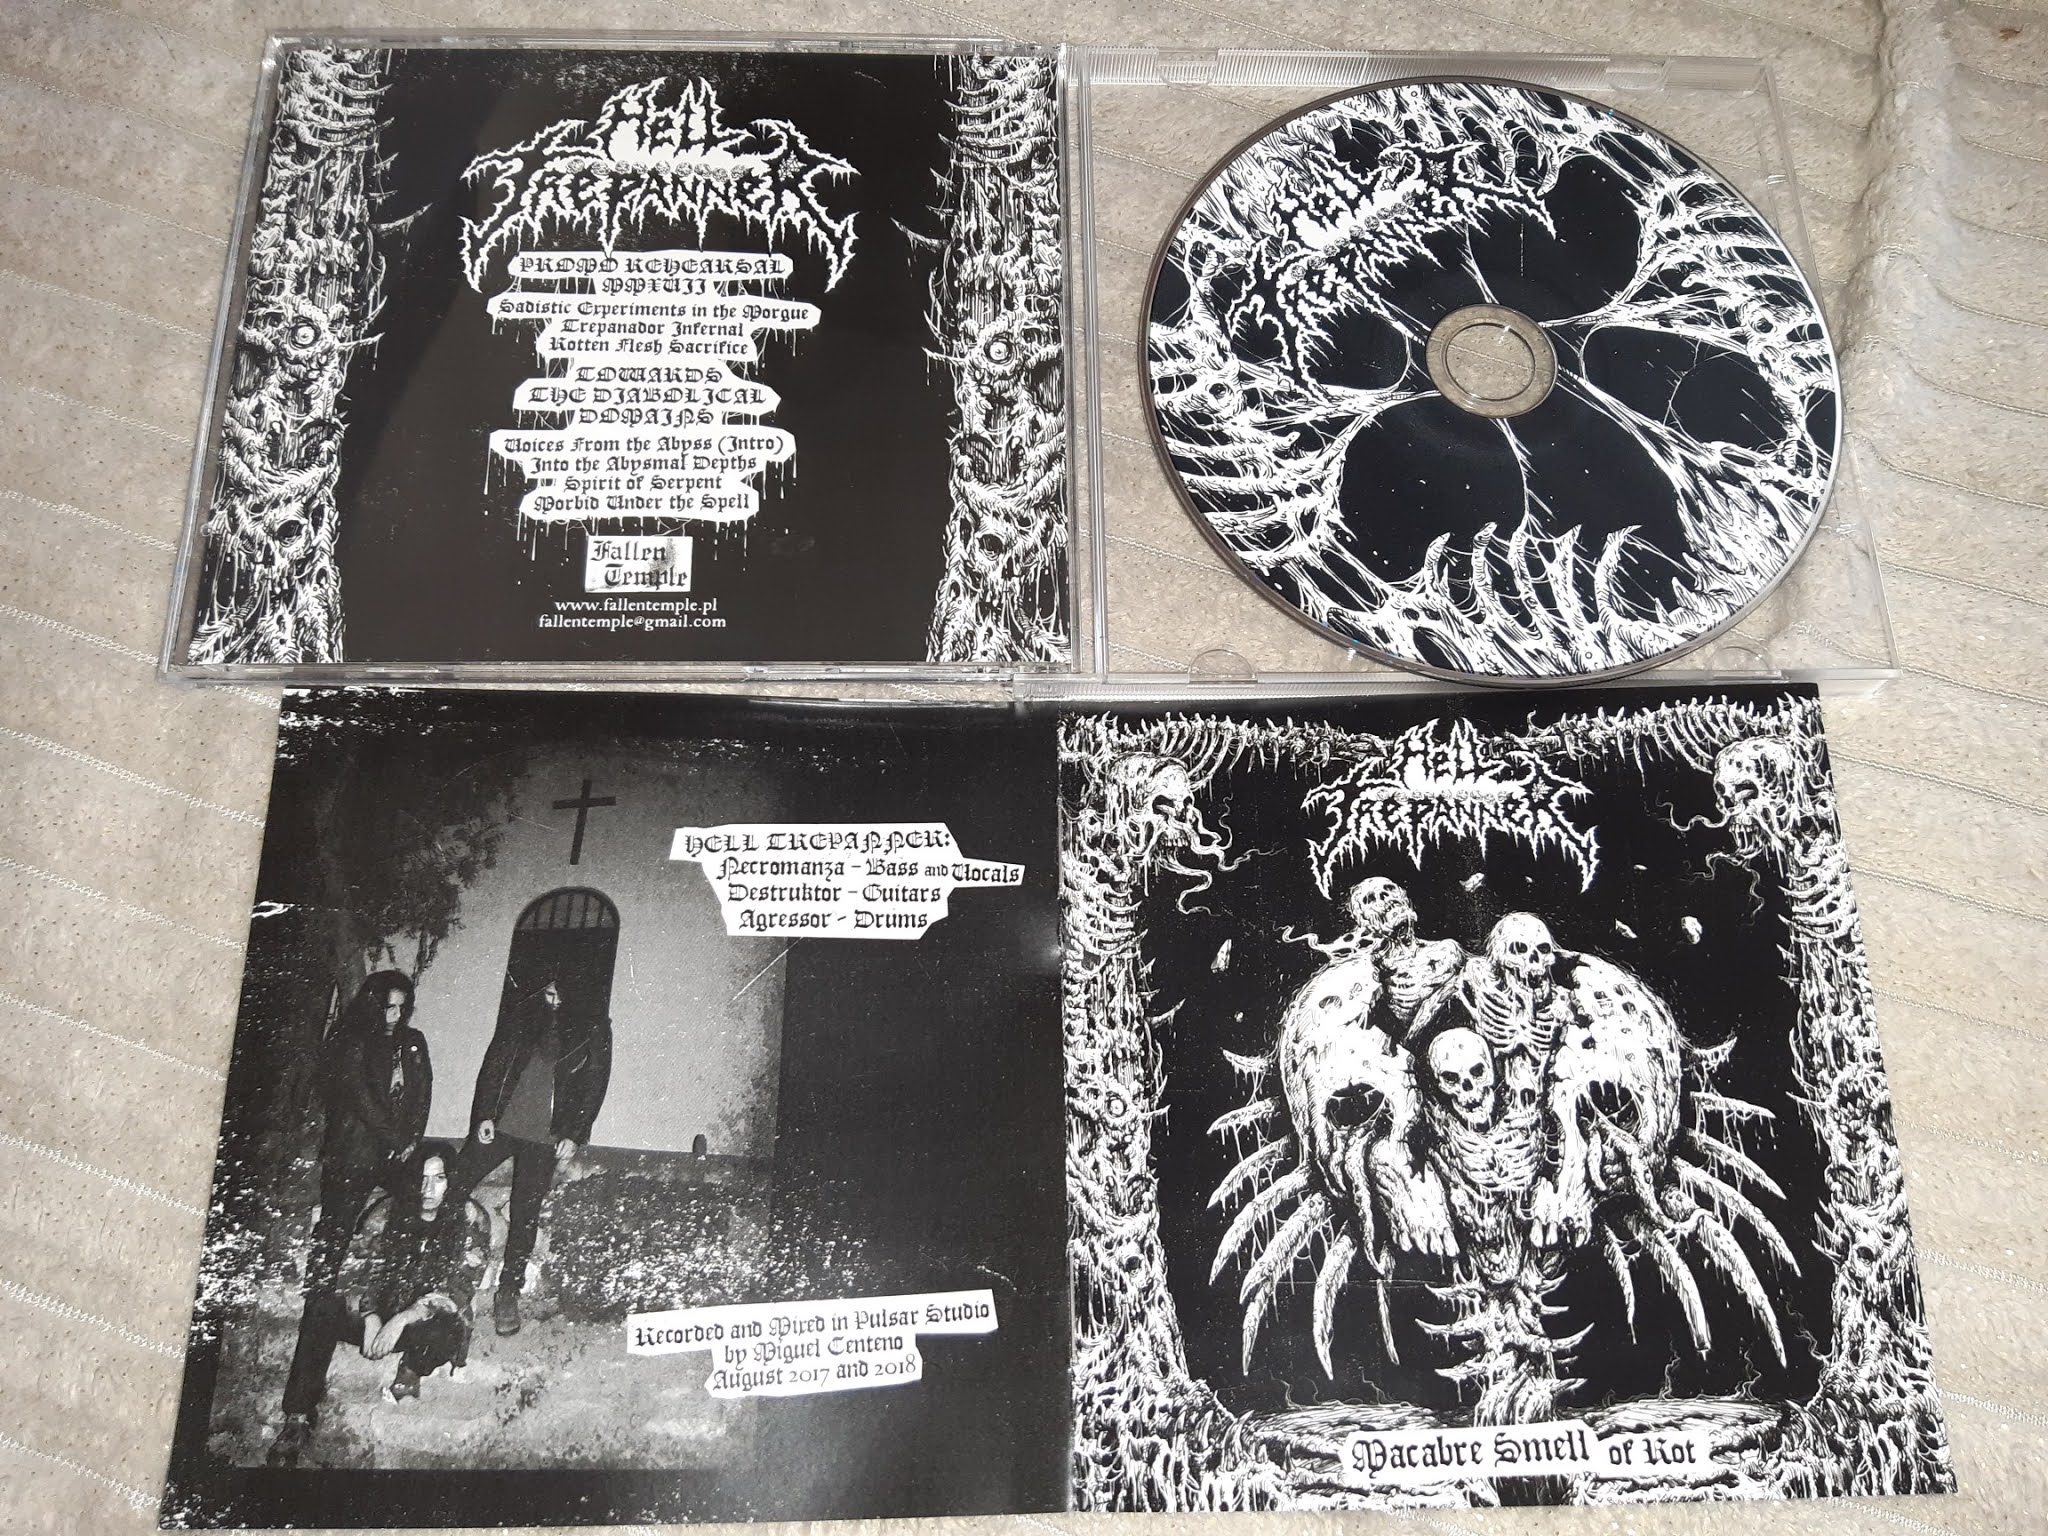 HELL TREPANNER - Macabre Smell of Rot. CD